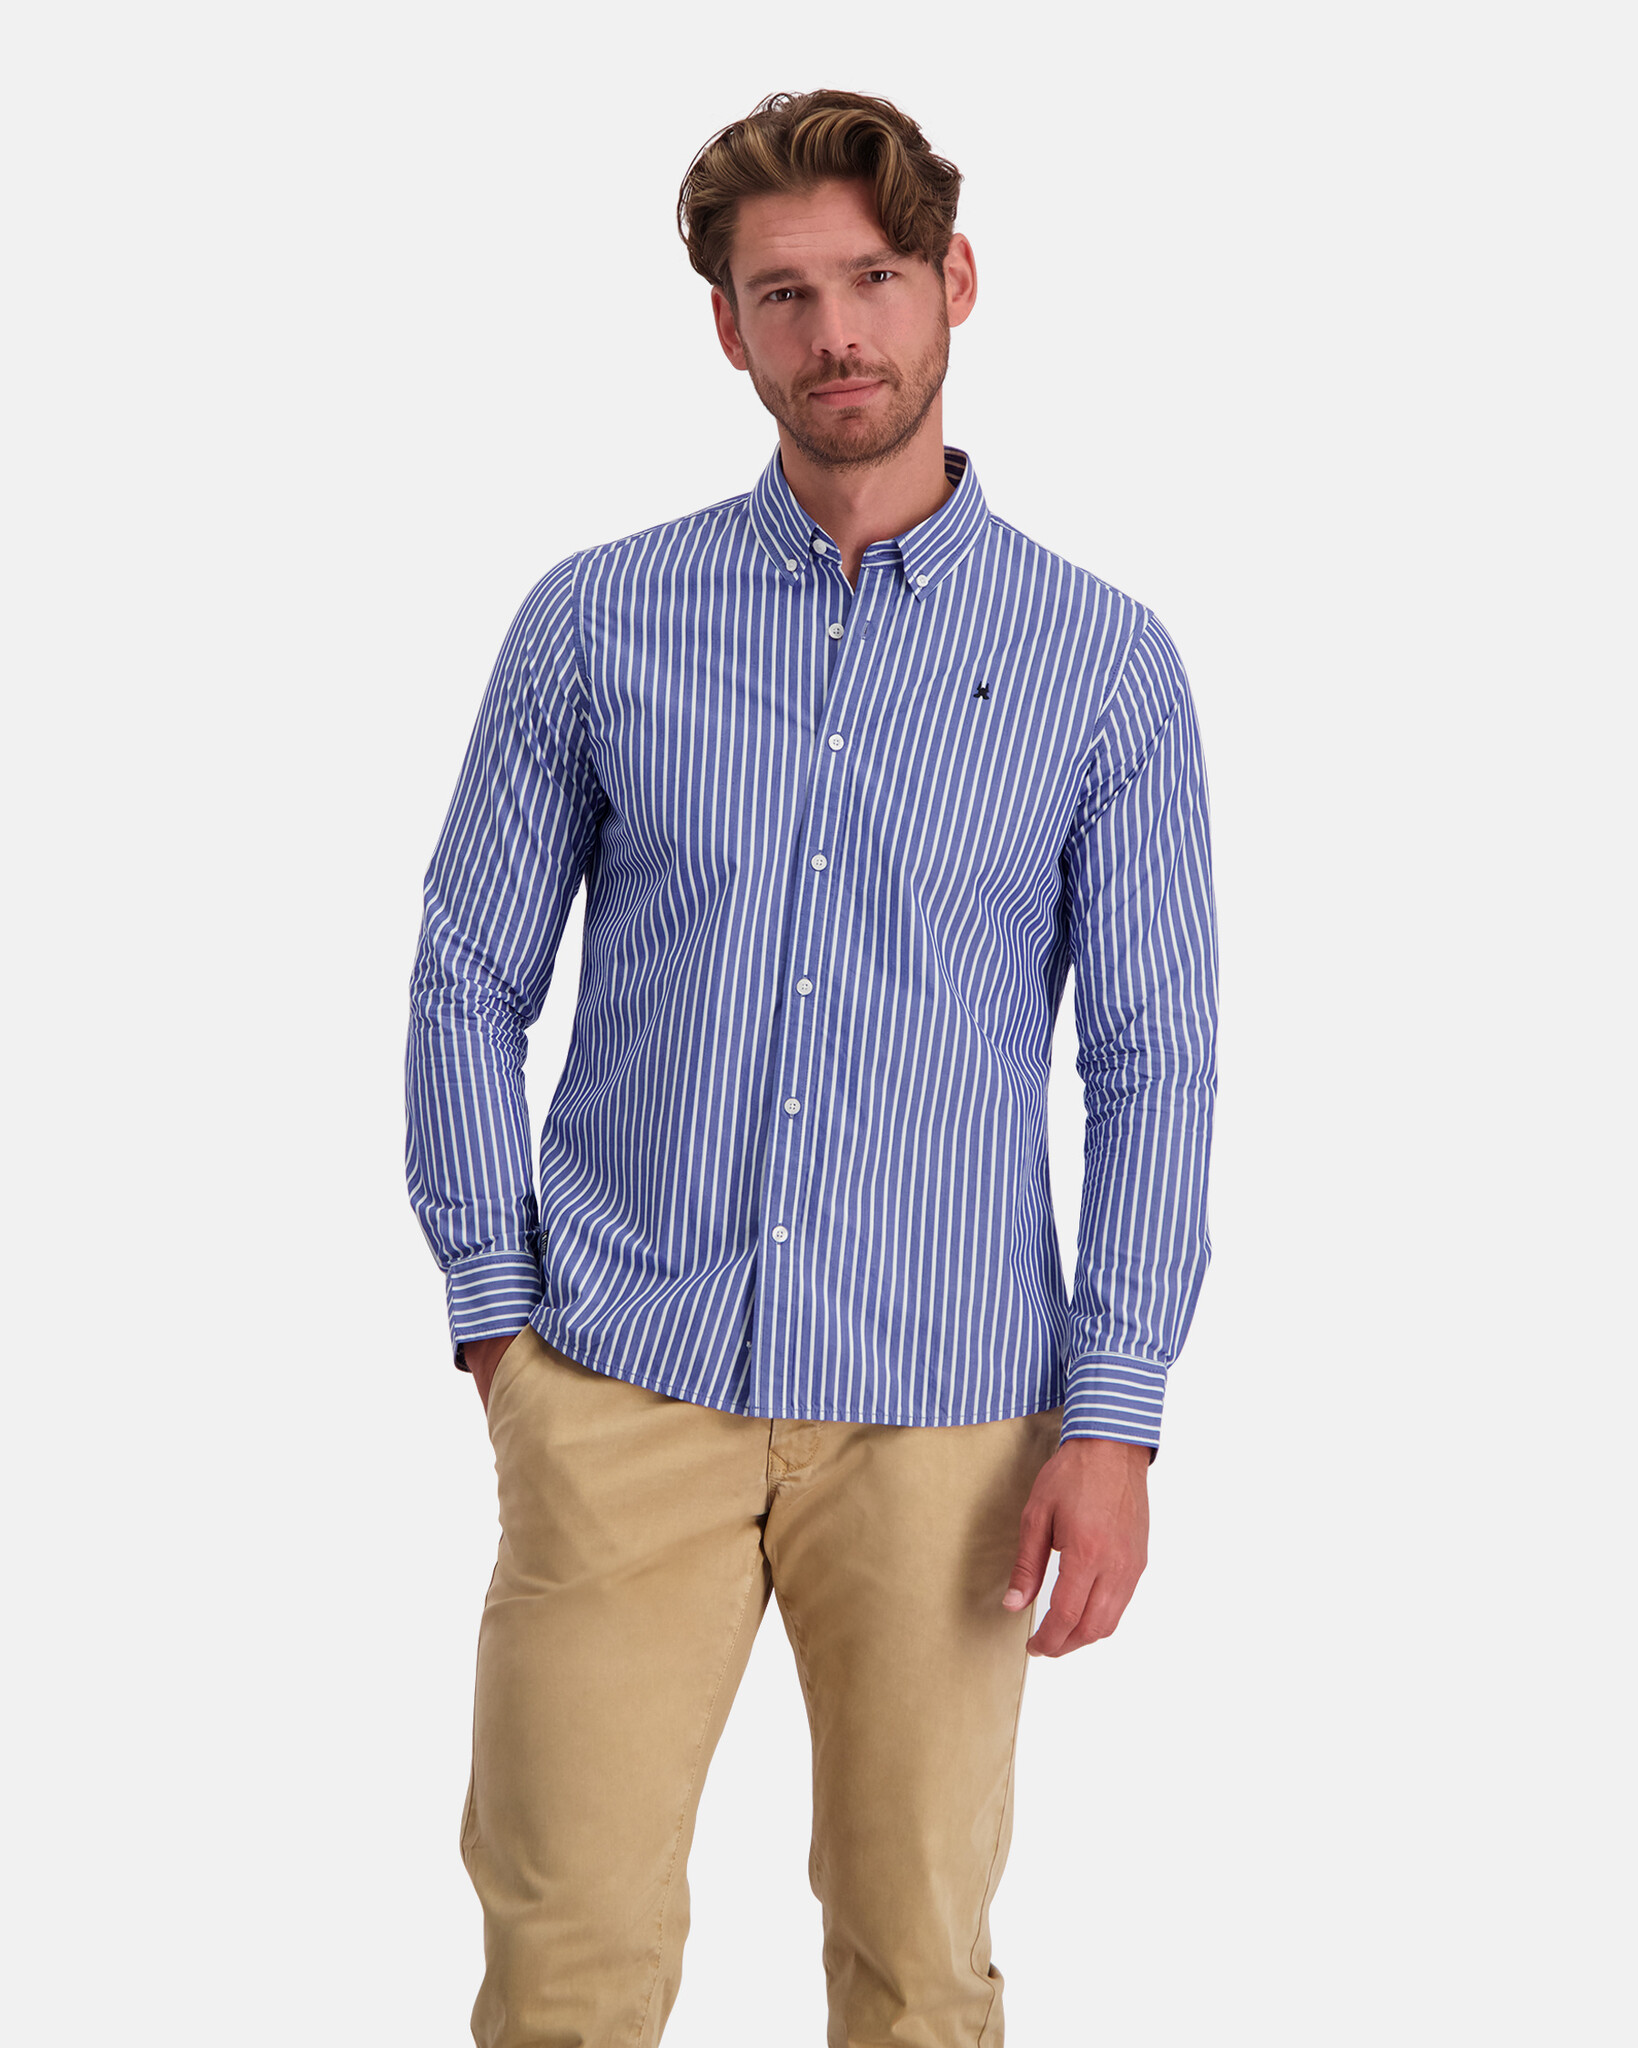 Regular fit 100% cotton, high dense poplin yarn dyed stripe shirt with button-down collar and tonal embroidered trademark logo